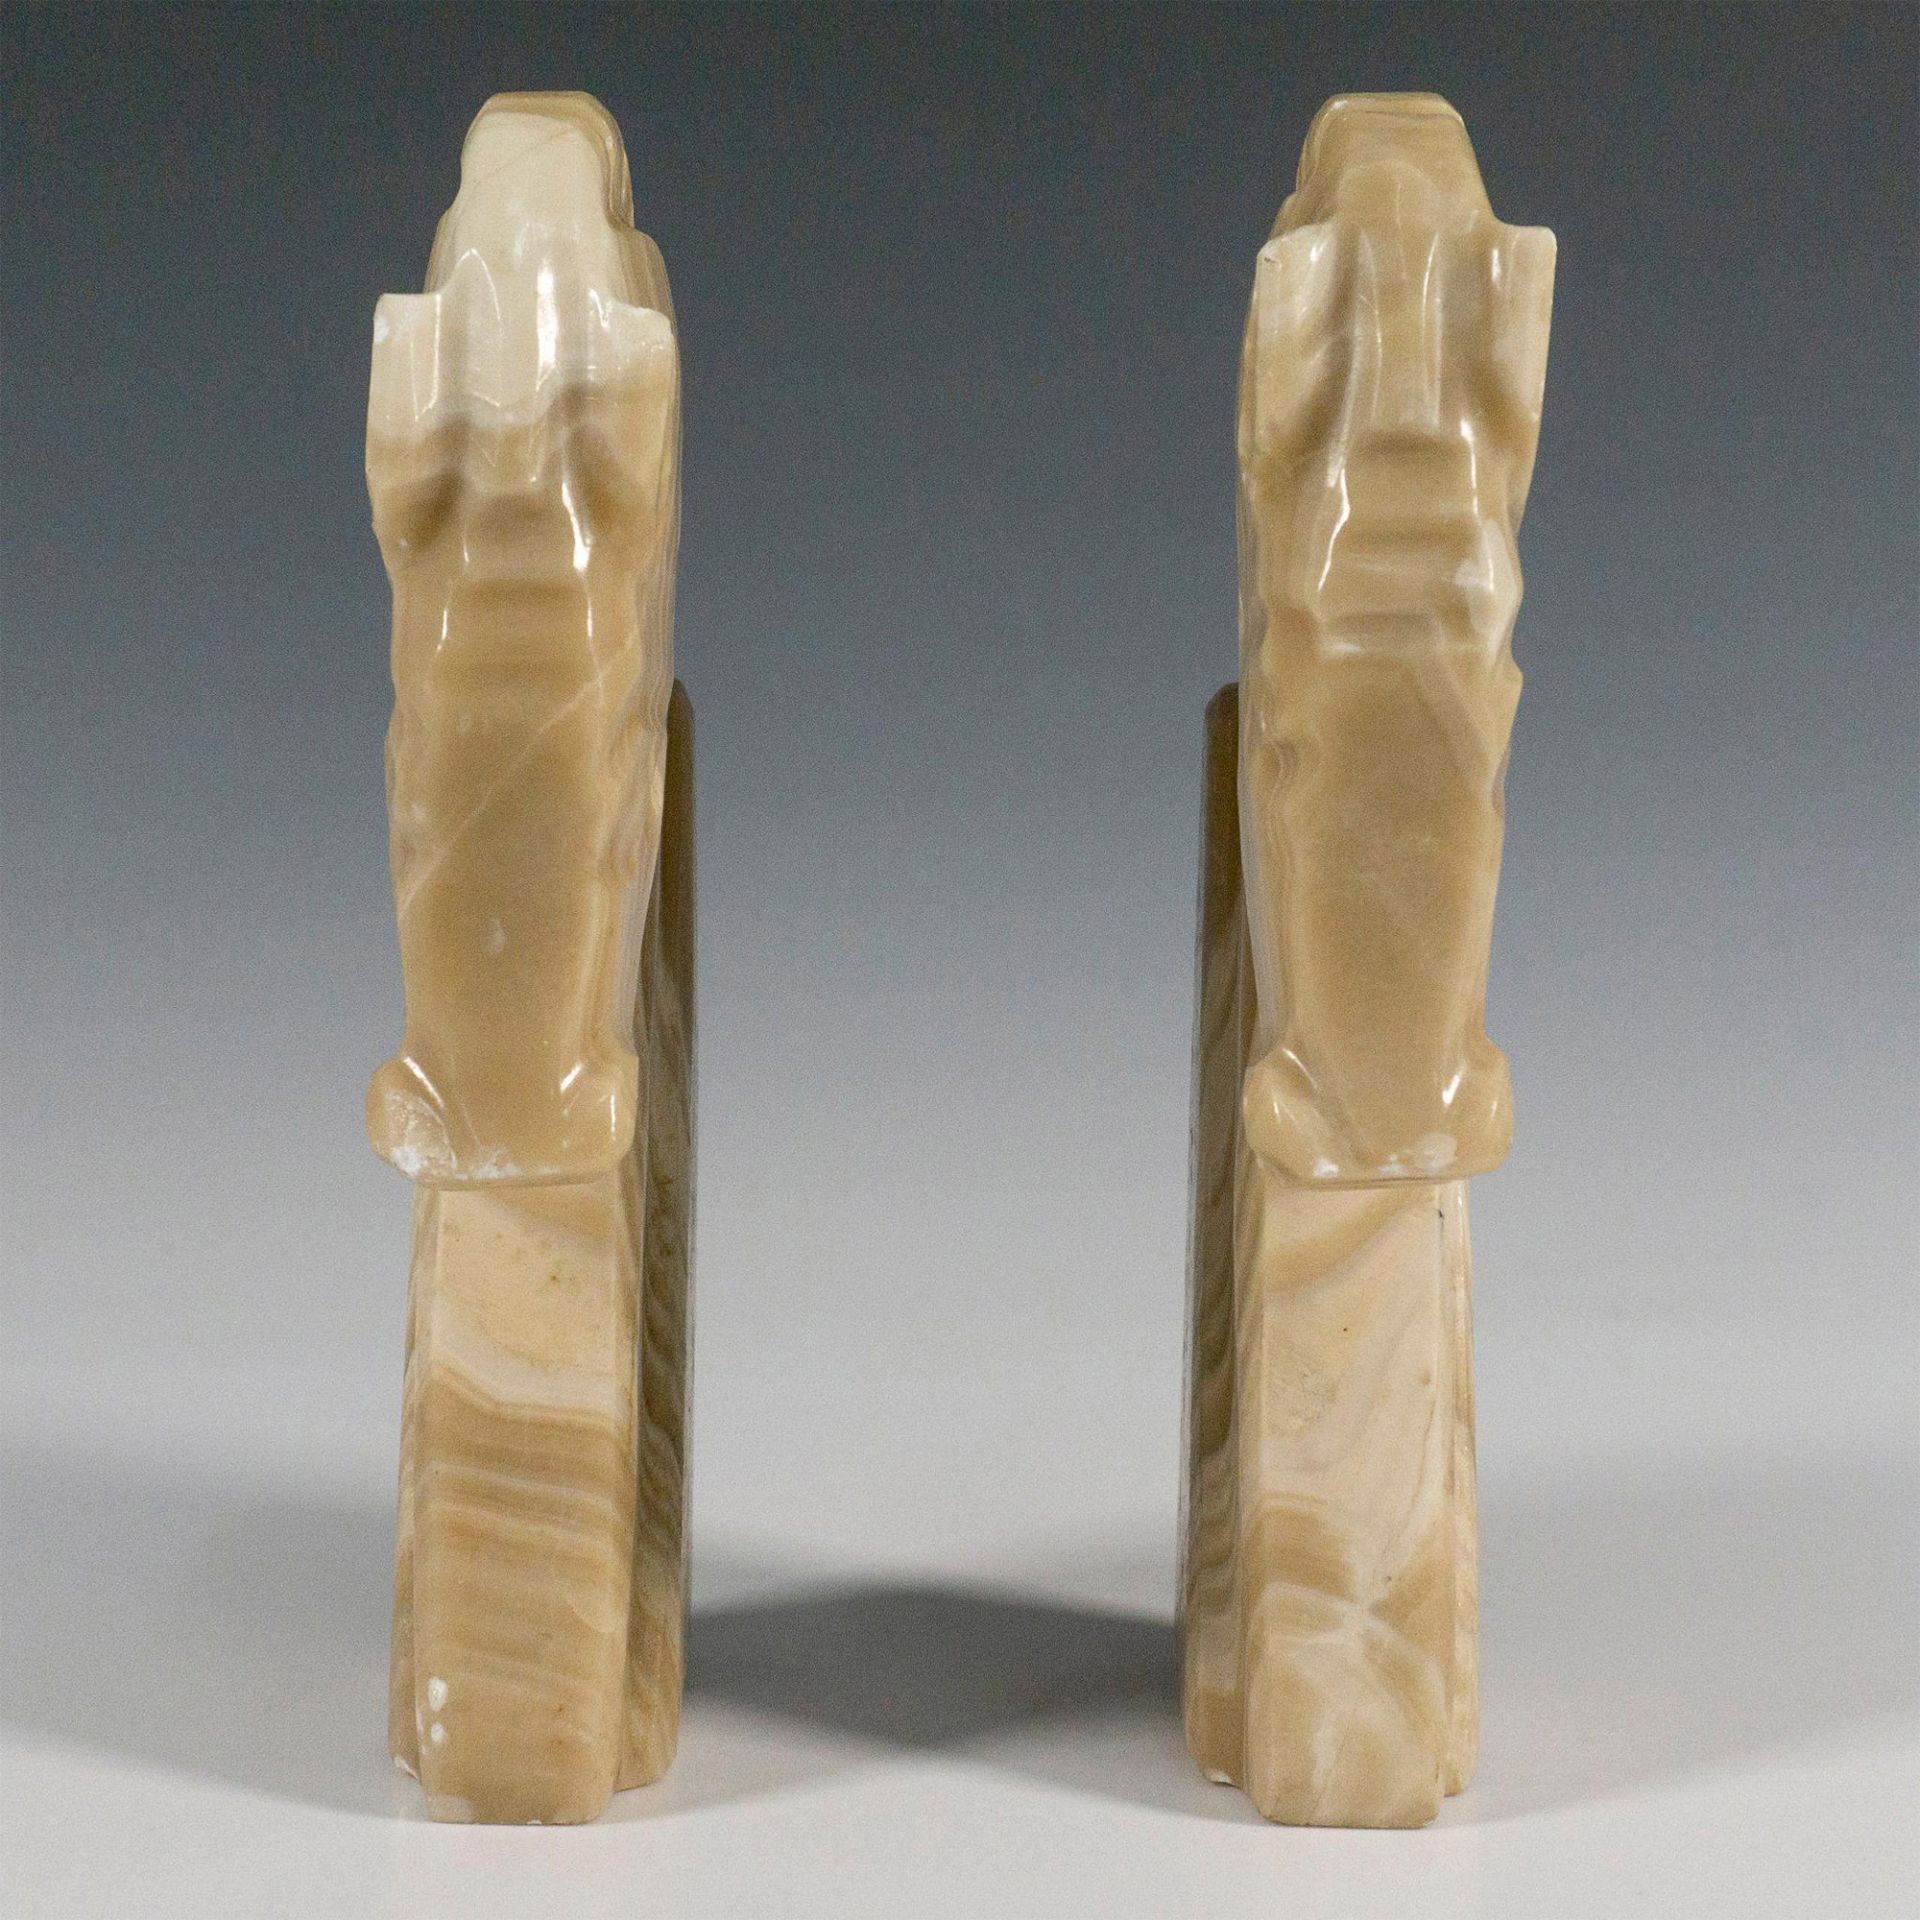 Pair of Vintage Stone Horse Head Bookends - Image 4 of 6